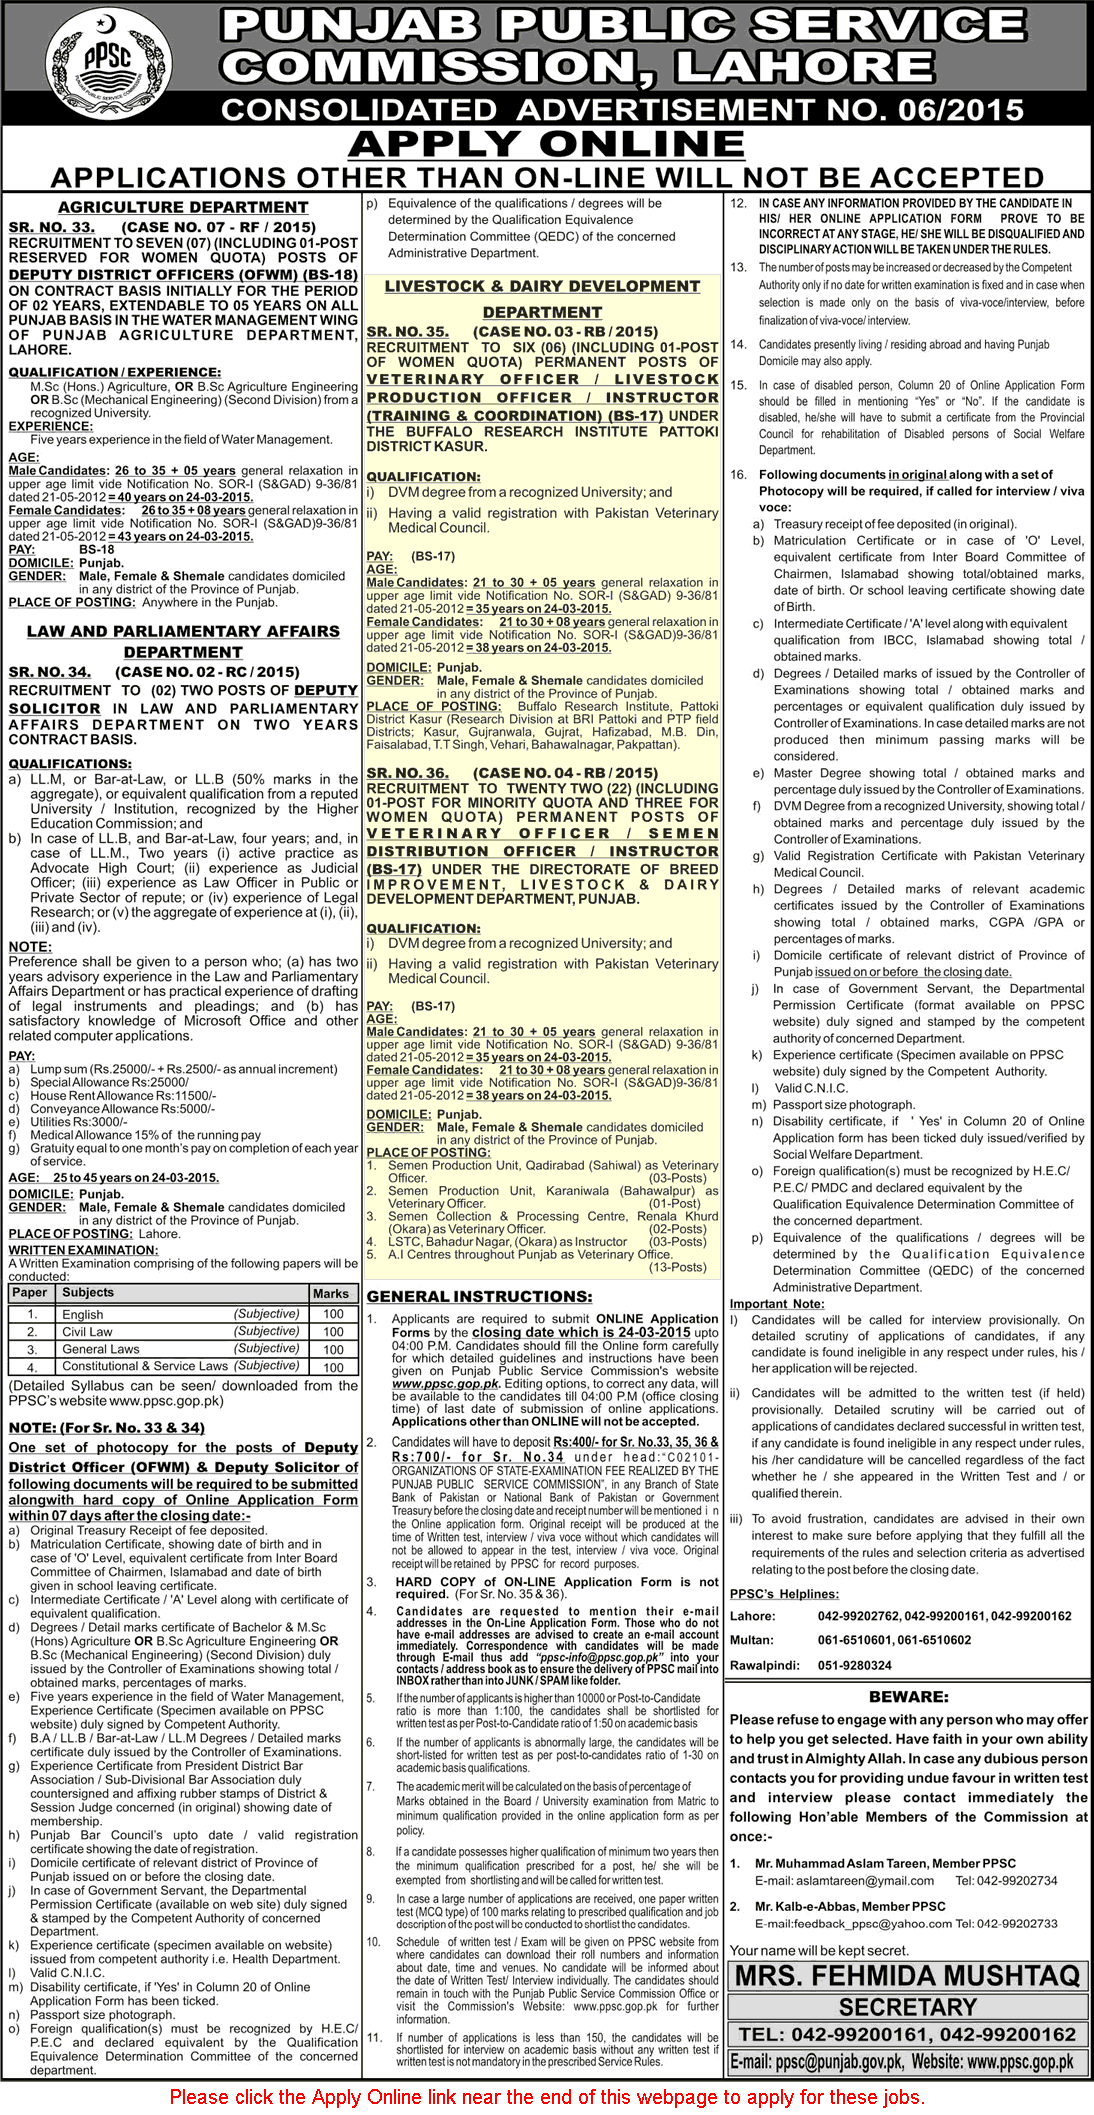 PPSC Veterinary Officer Jobs 2015 March DVM in Punjab Livestock and Dairy Development Department